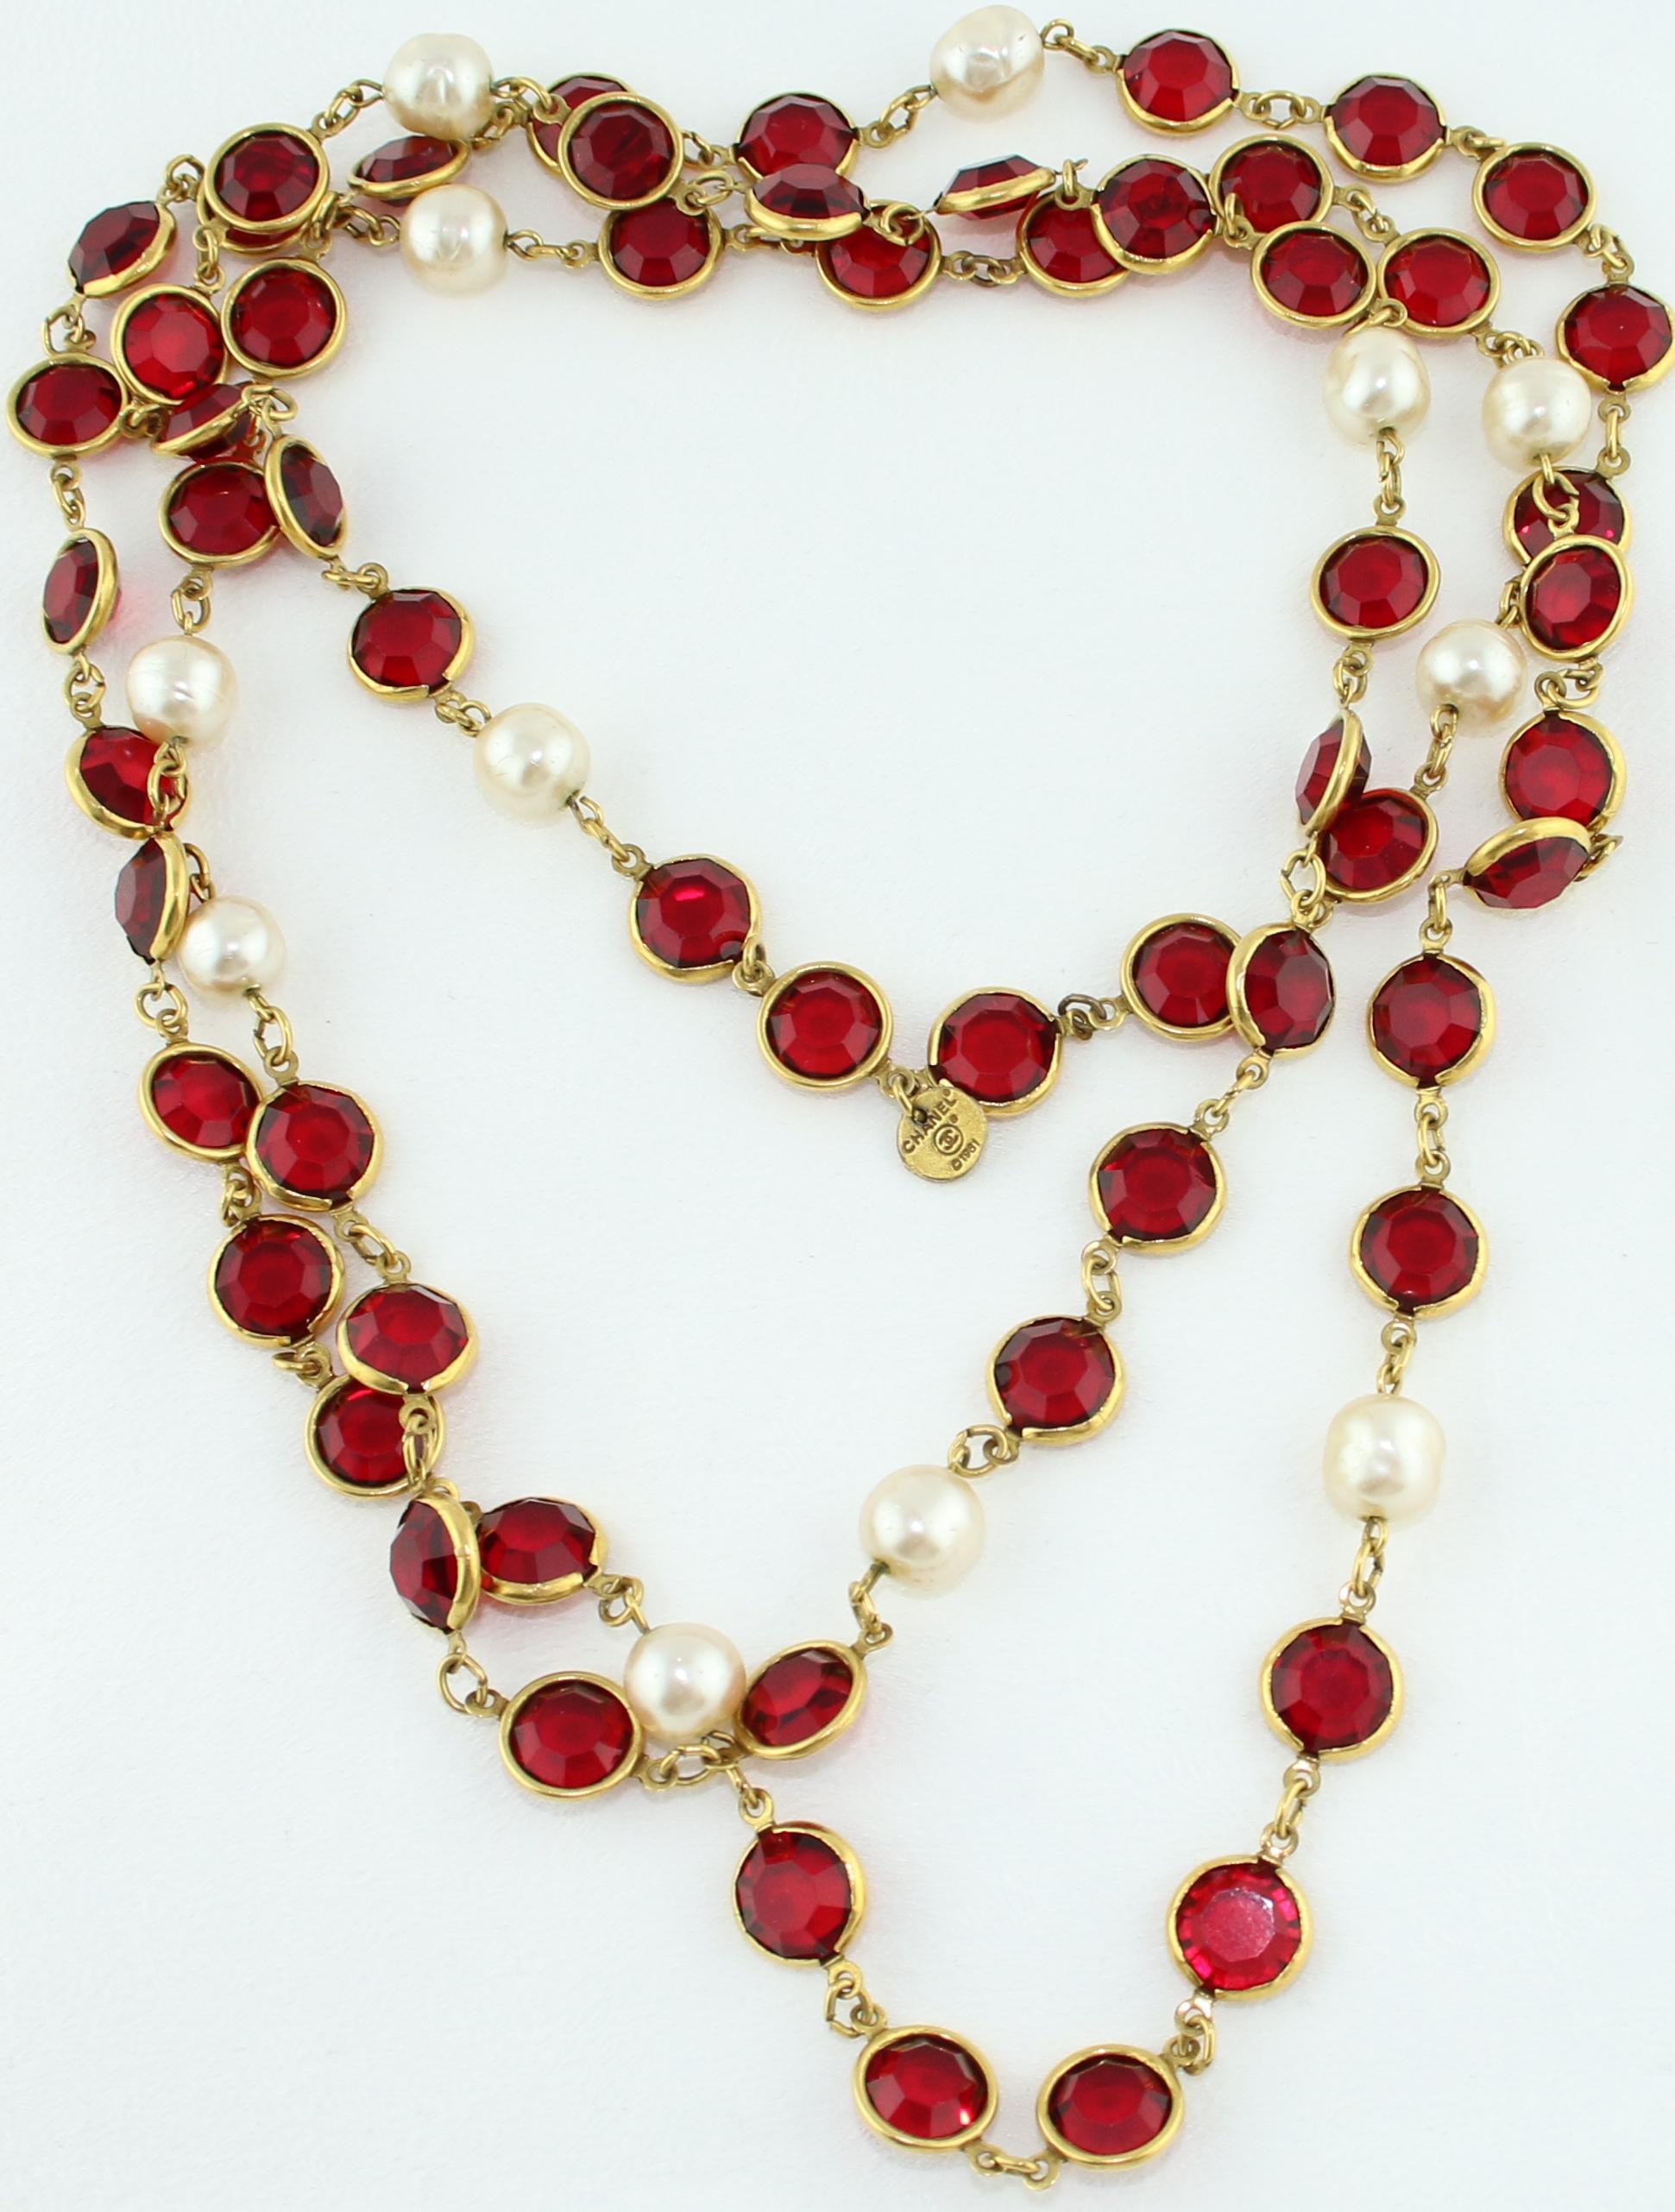 Vintage CHANEL 1981 Faux Pearl & Red Gripoix Long Necklace For Sale 1